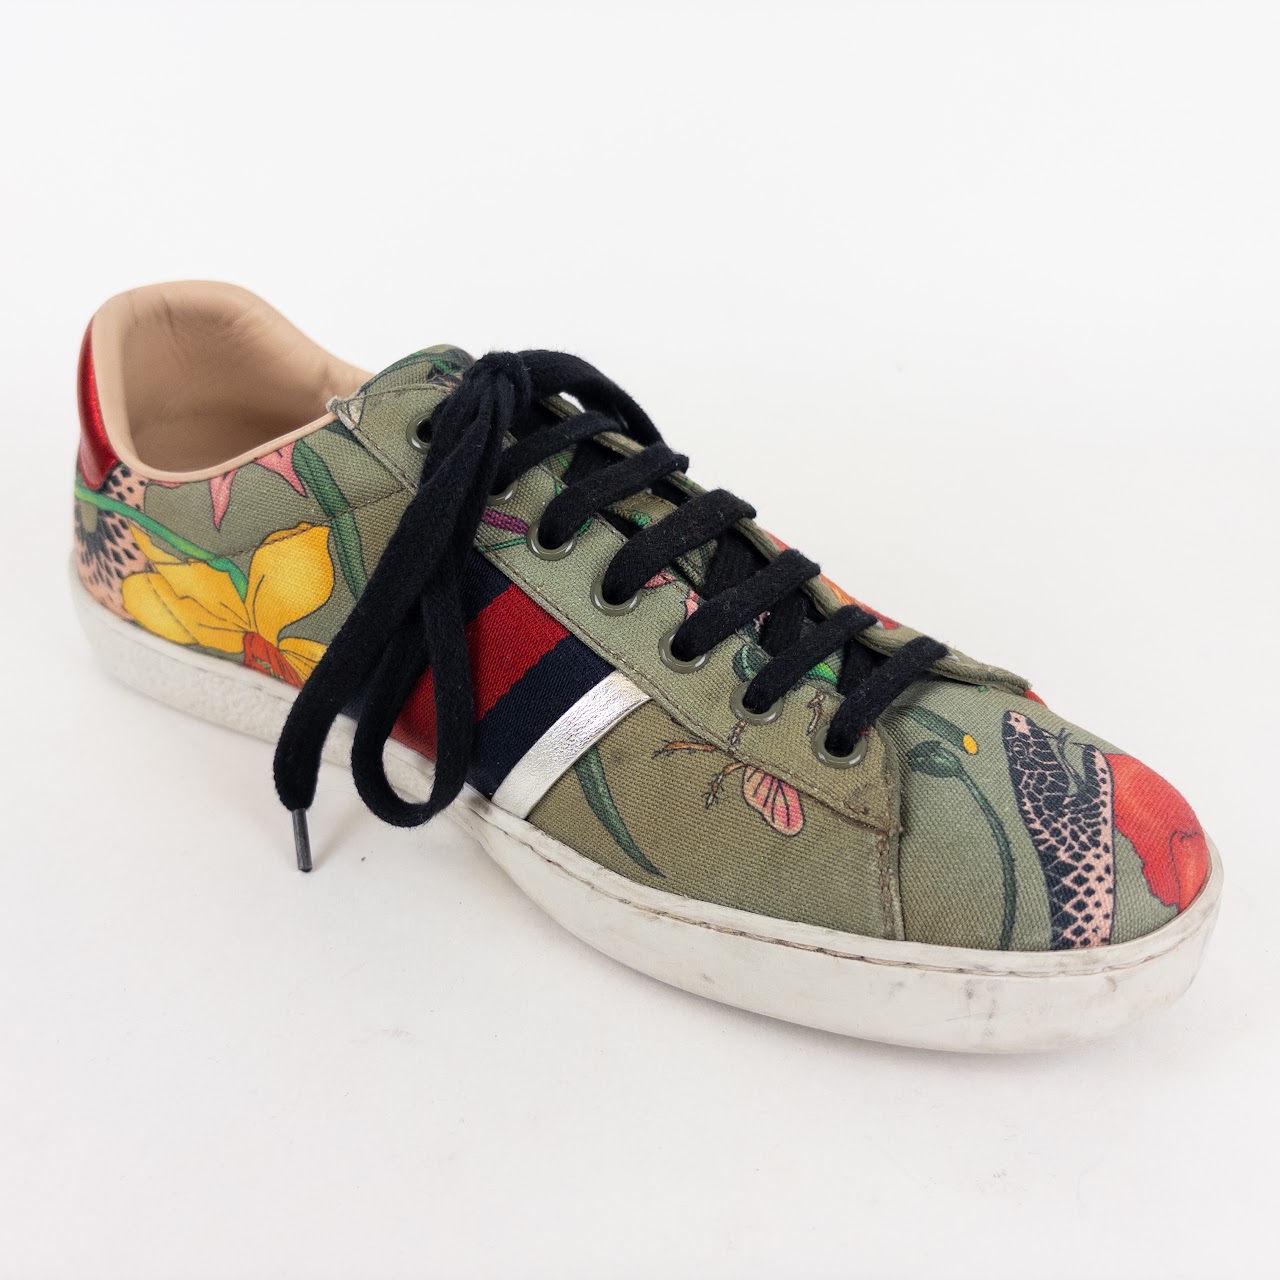 Gucci Ace Flora Snake Canvas Sneakers